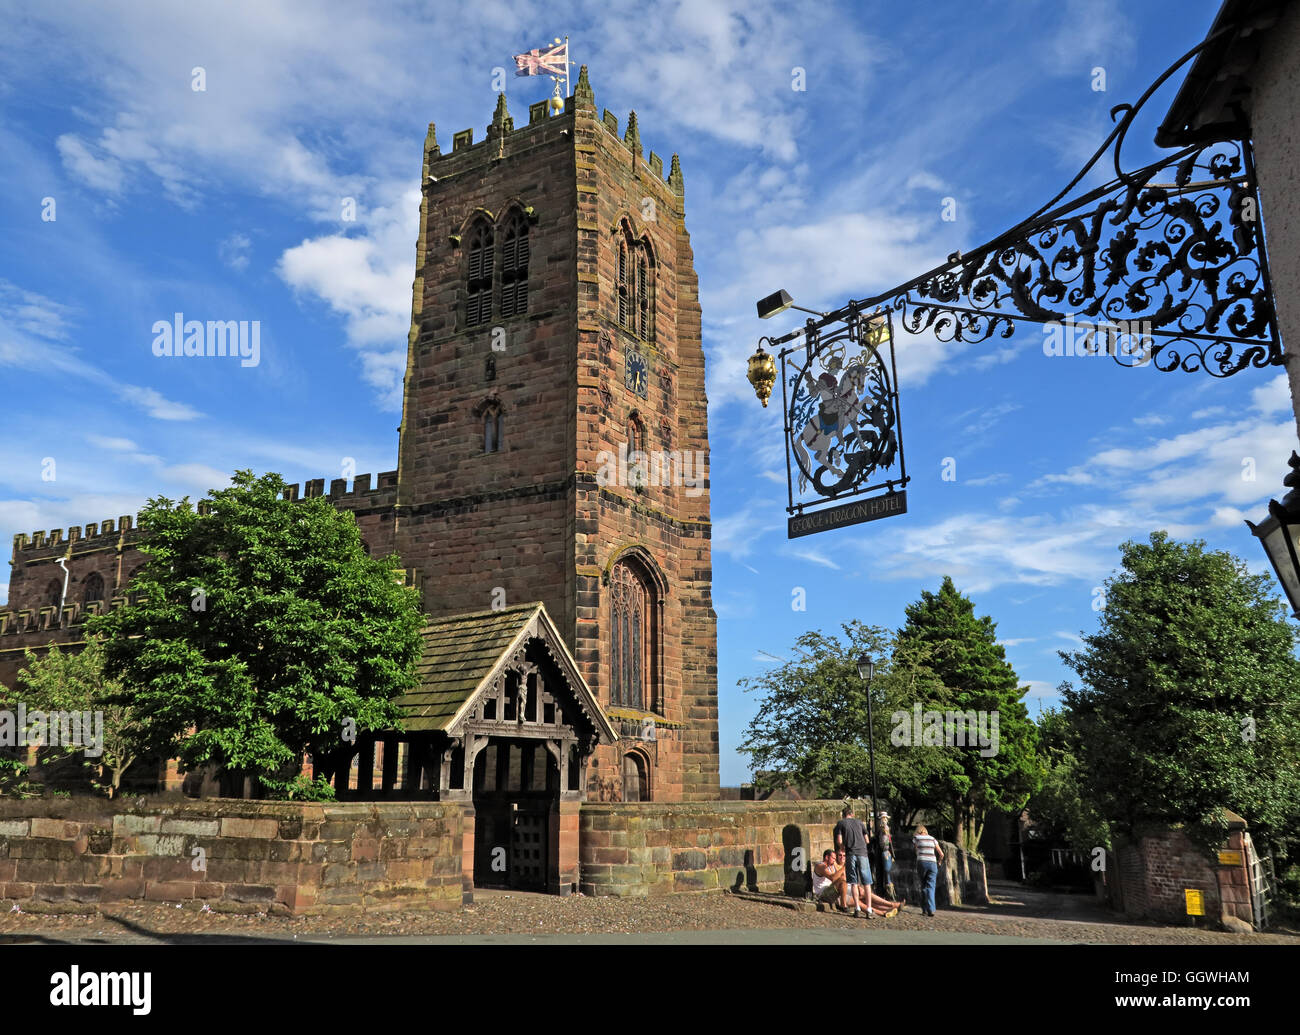 George and Dragon signe en fer forgé et St Marys Church,Great Budworth,Cheshire, Angleterre, Royaume-Uni Banque D'Images